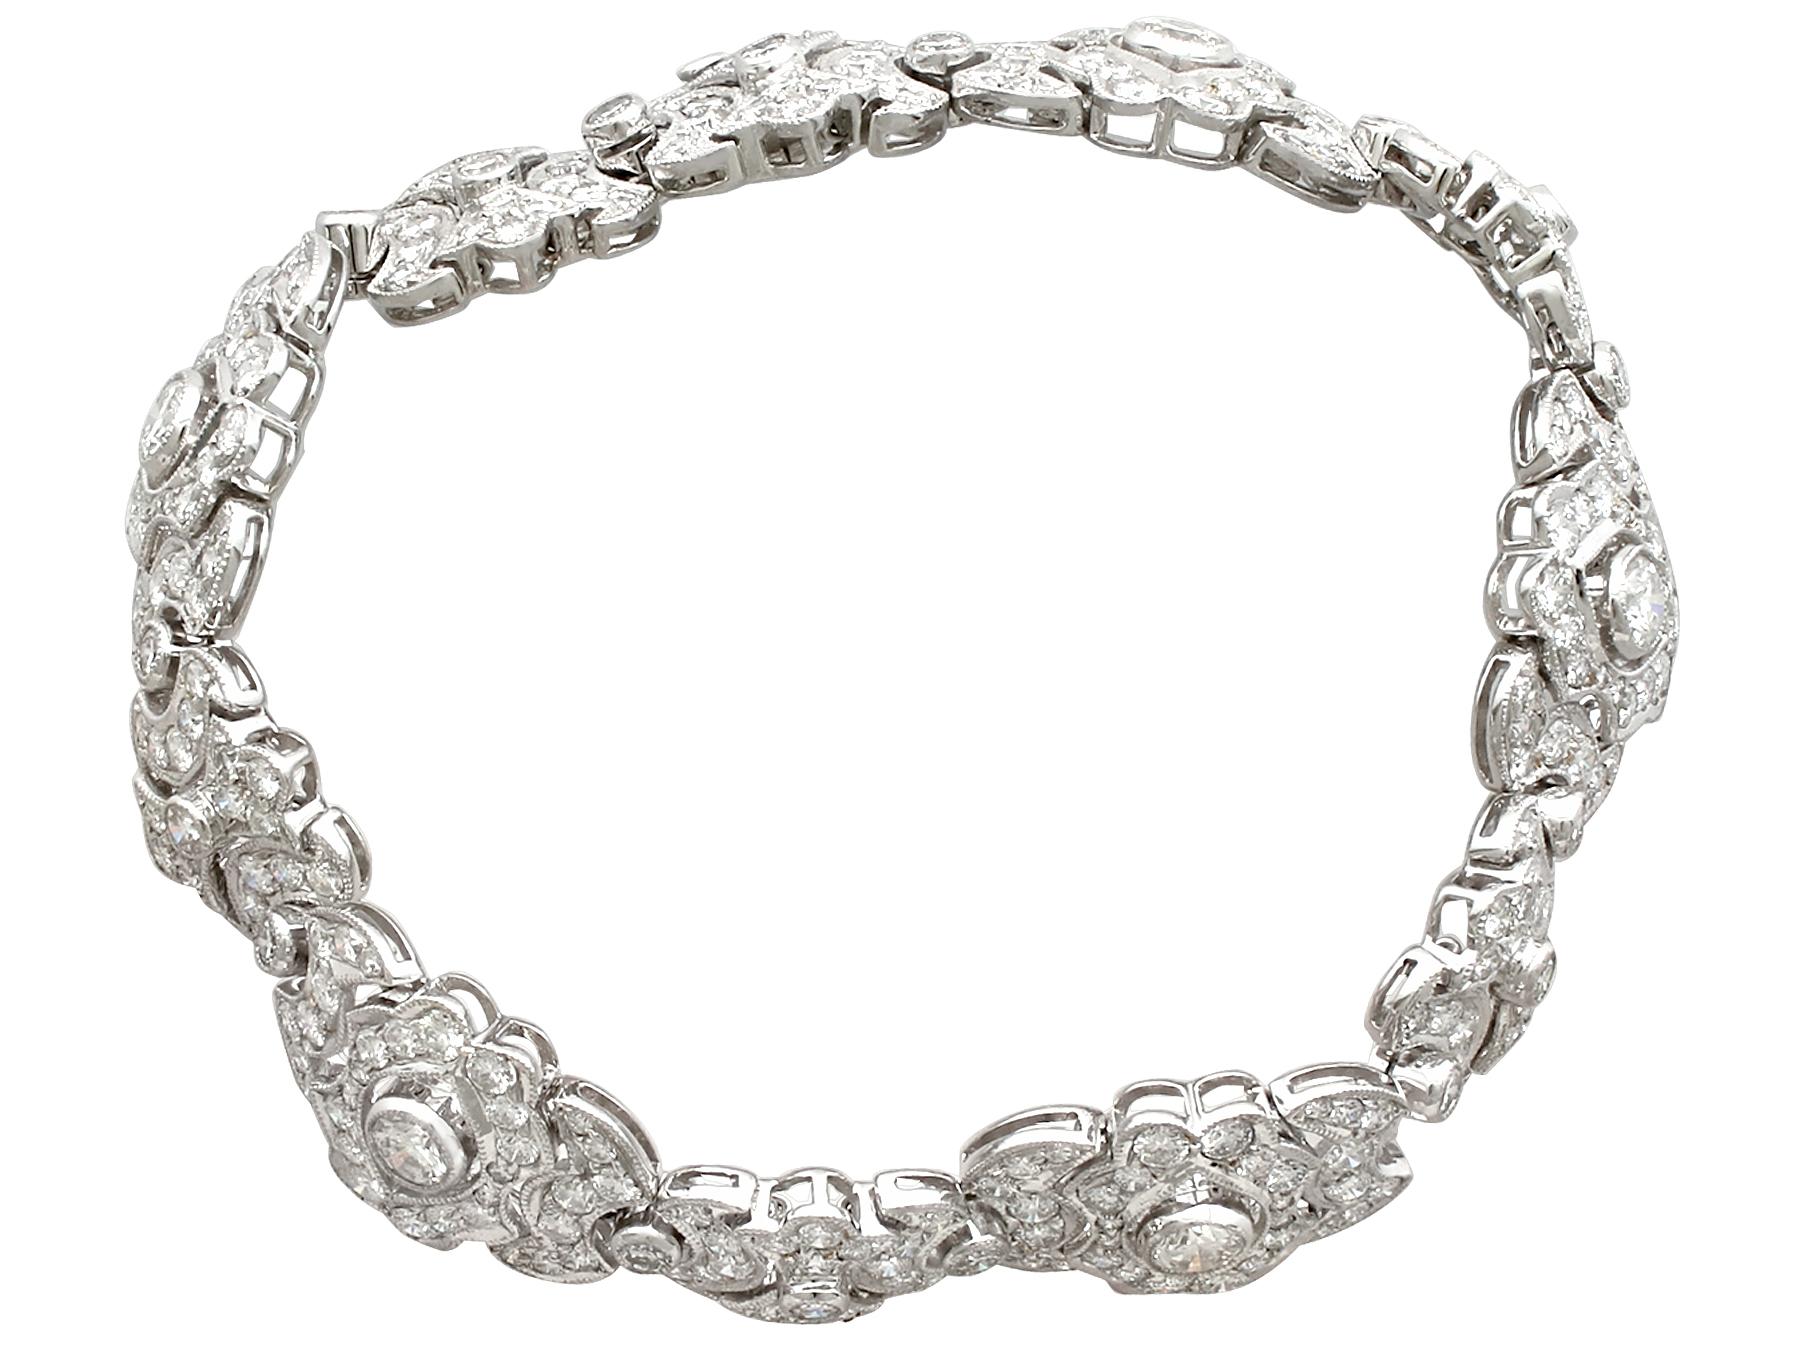 A stunning, fine and impressive 7.22 carat diamond and 18 karat white gold bracelet; part of our diverse a jewelry collections

This stunning, fine and impressive diamond bracelet has been crafted in 18 k white gold.

The bracelet consists of eleven